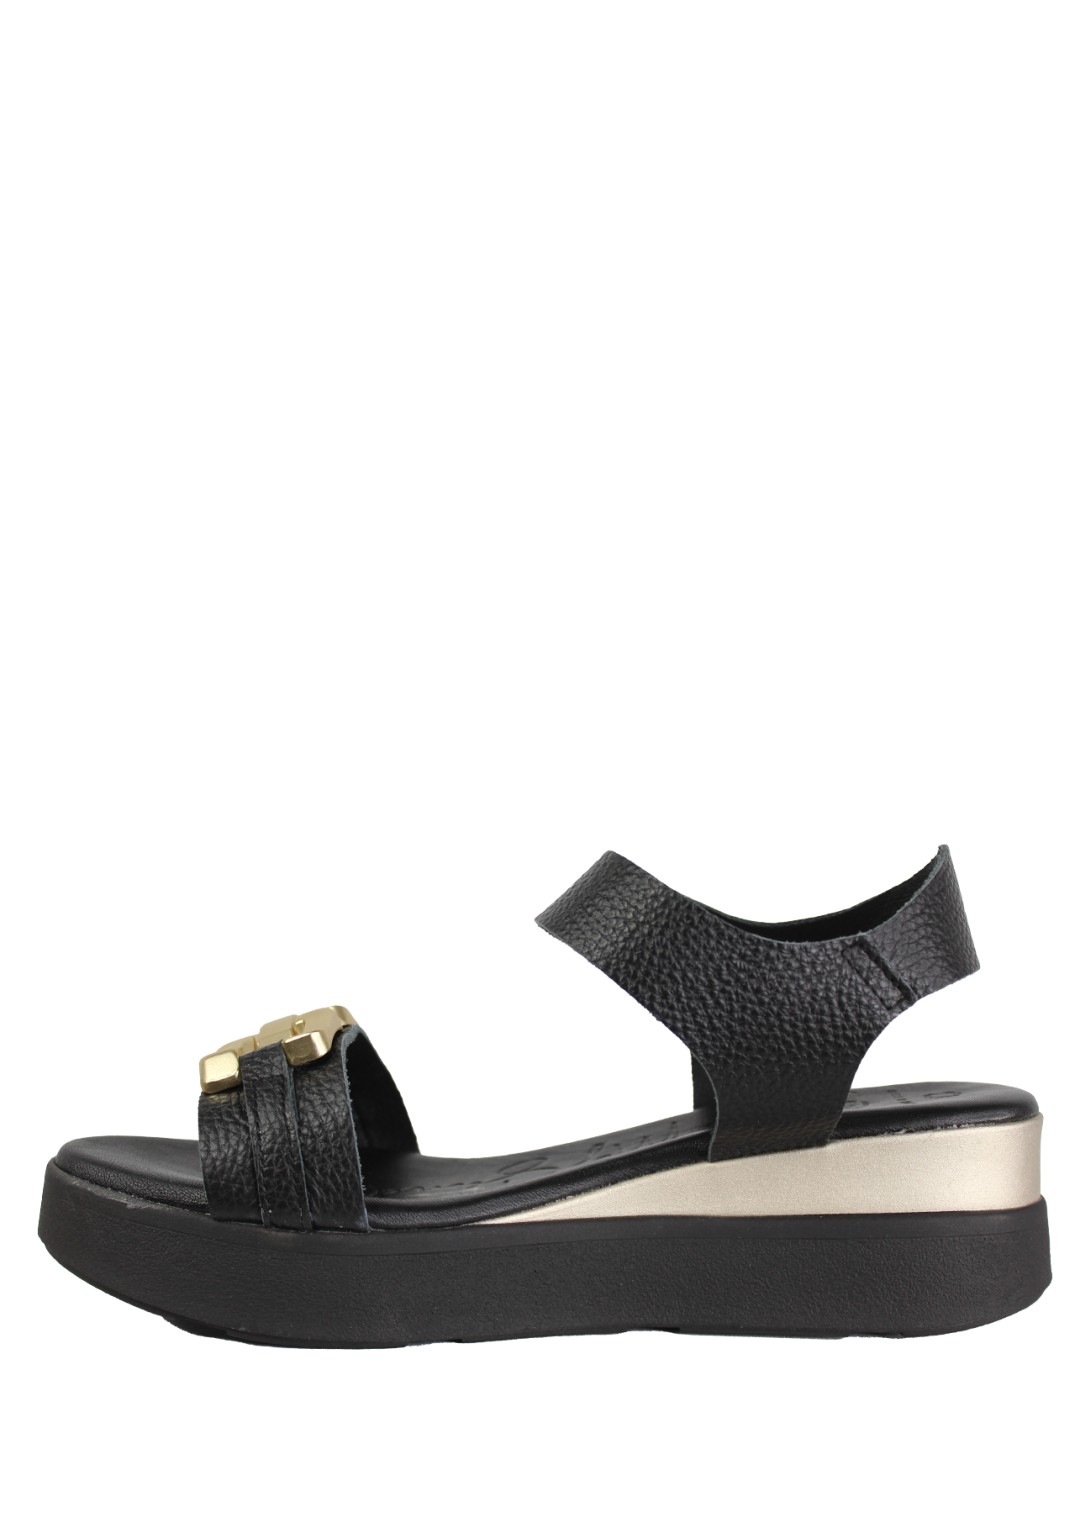 Oh! My Sandals - Sandalo Catena - Donna - 5419